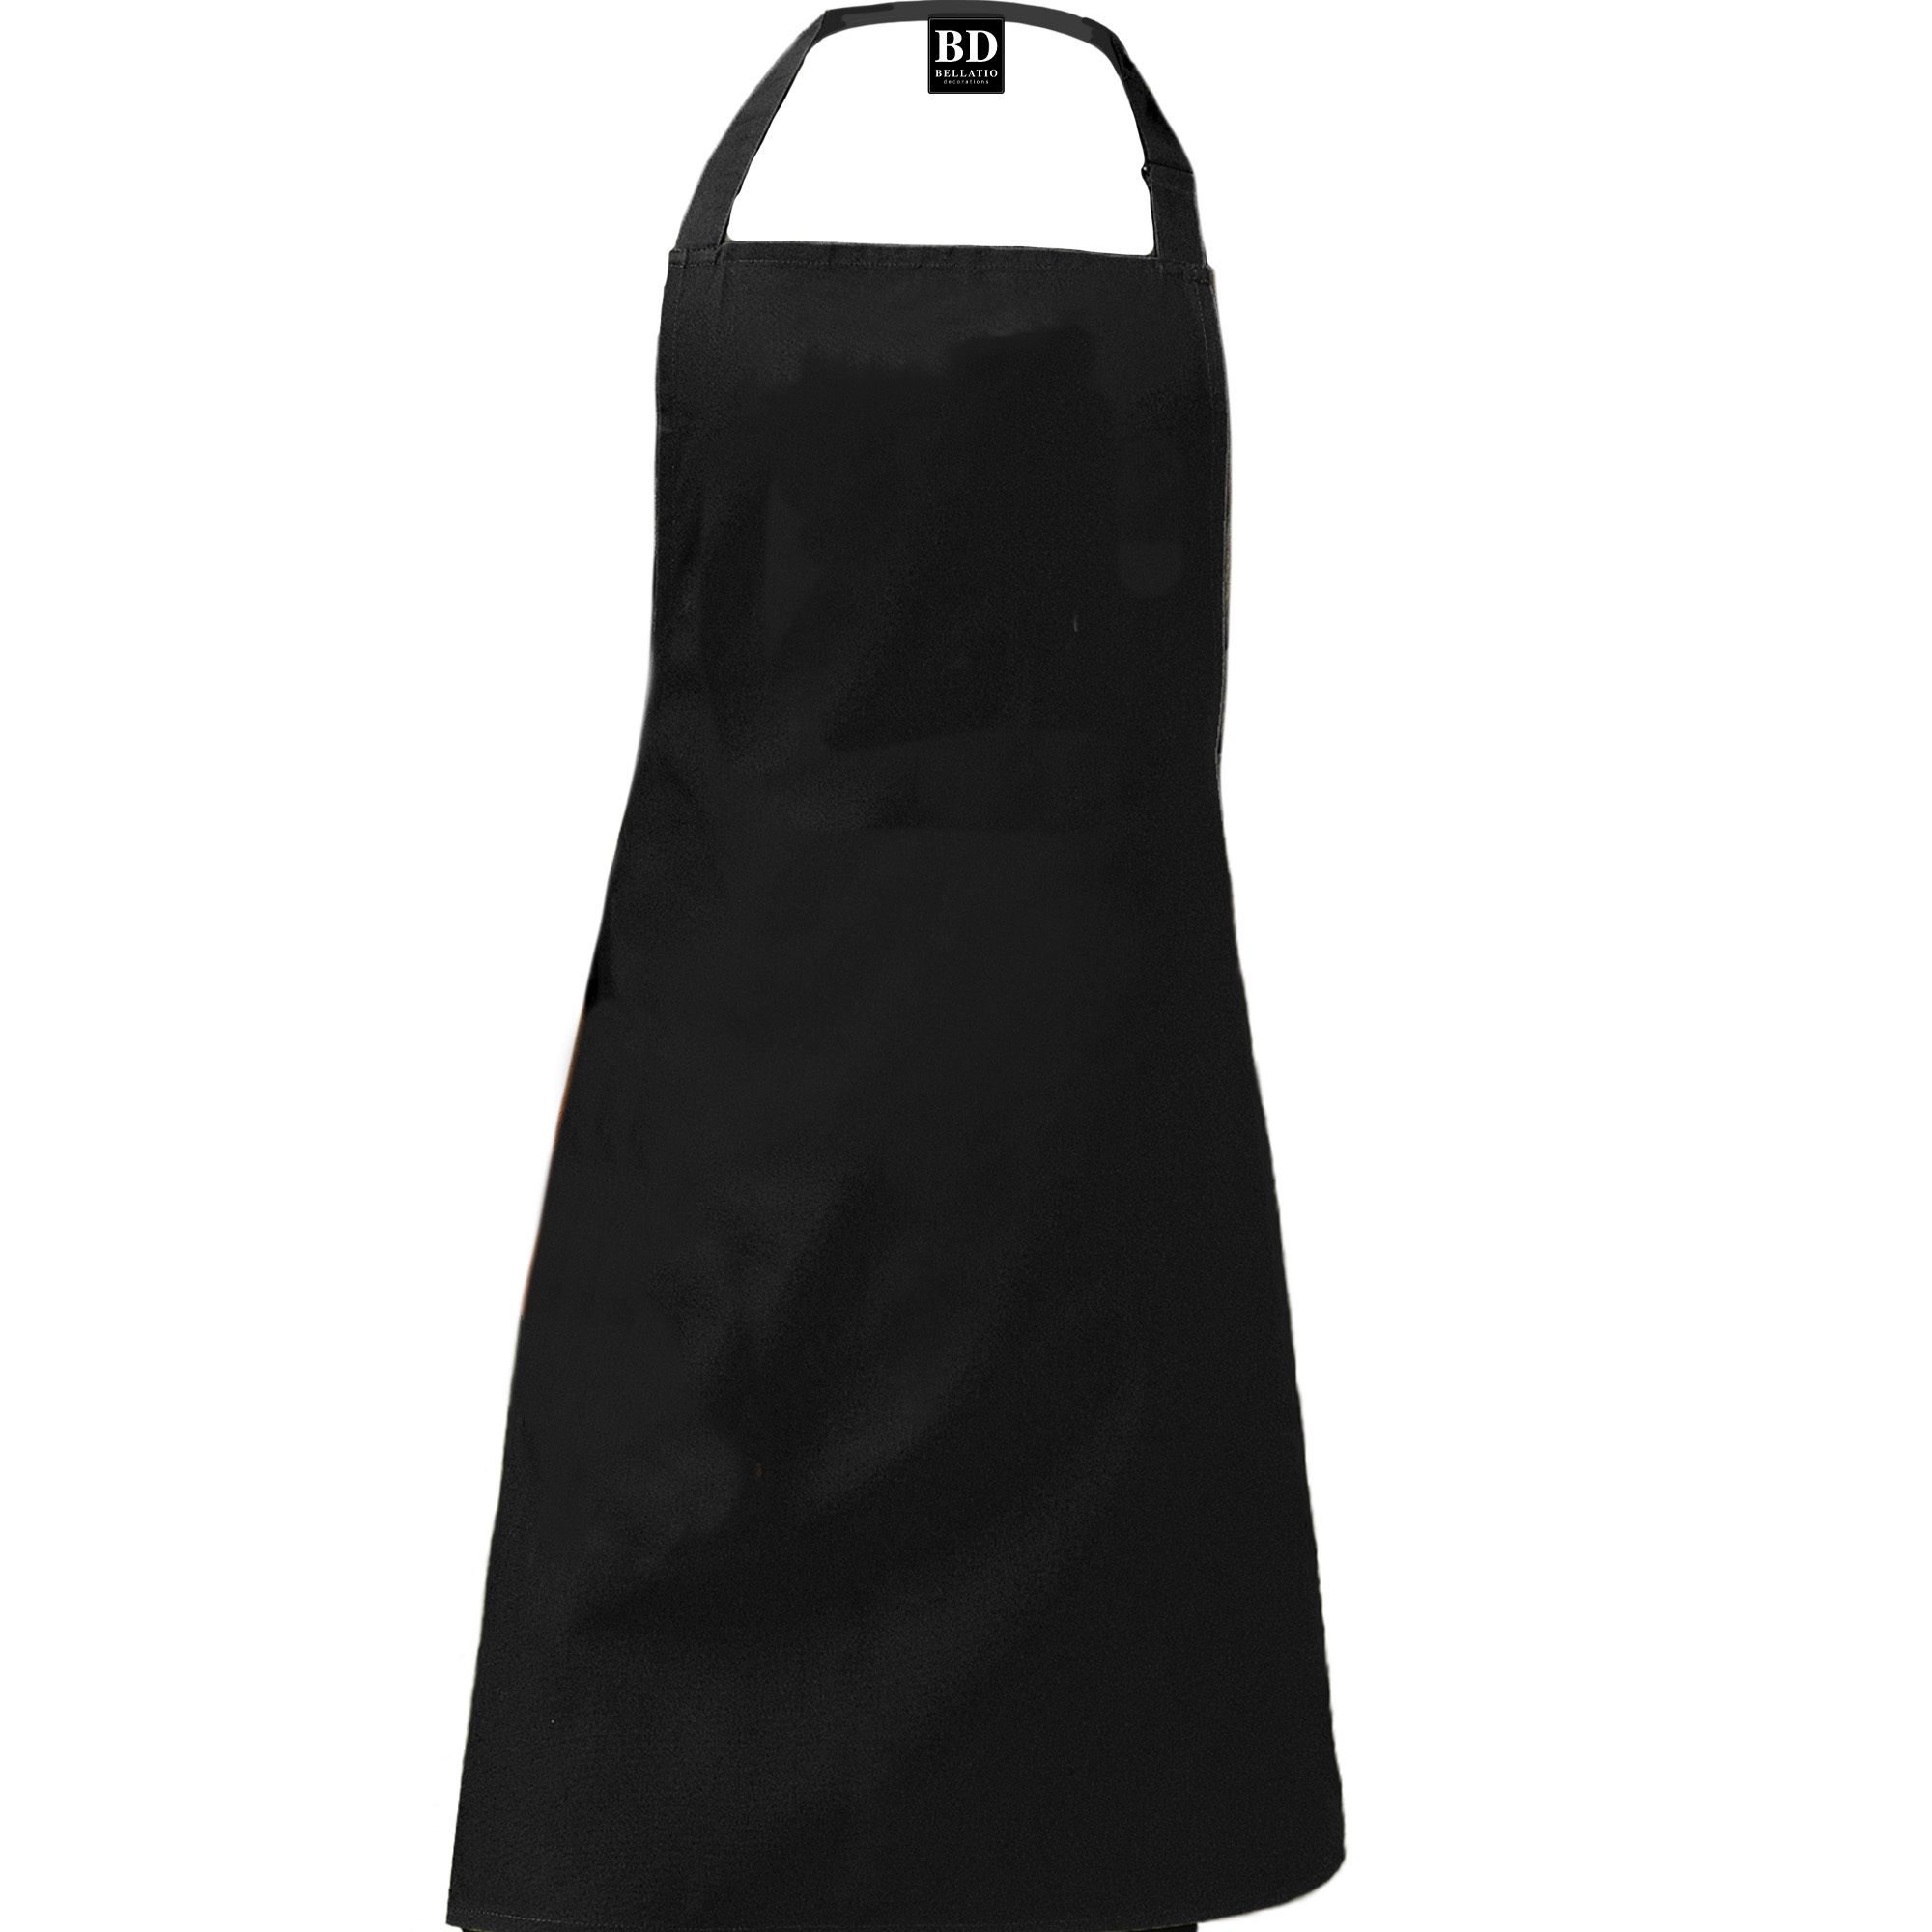 I cook French apron black 